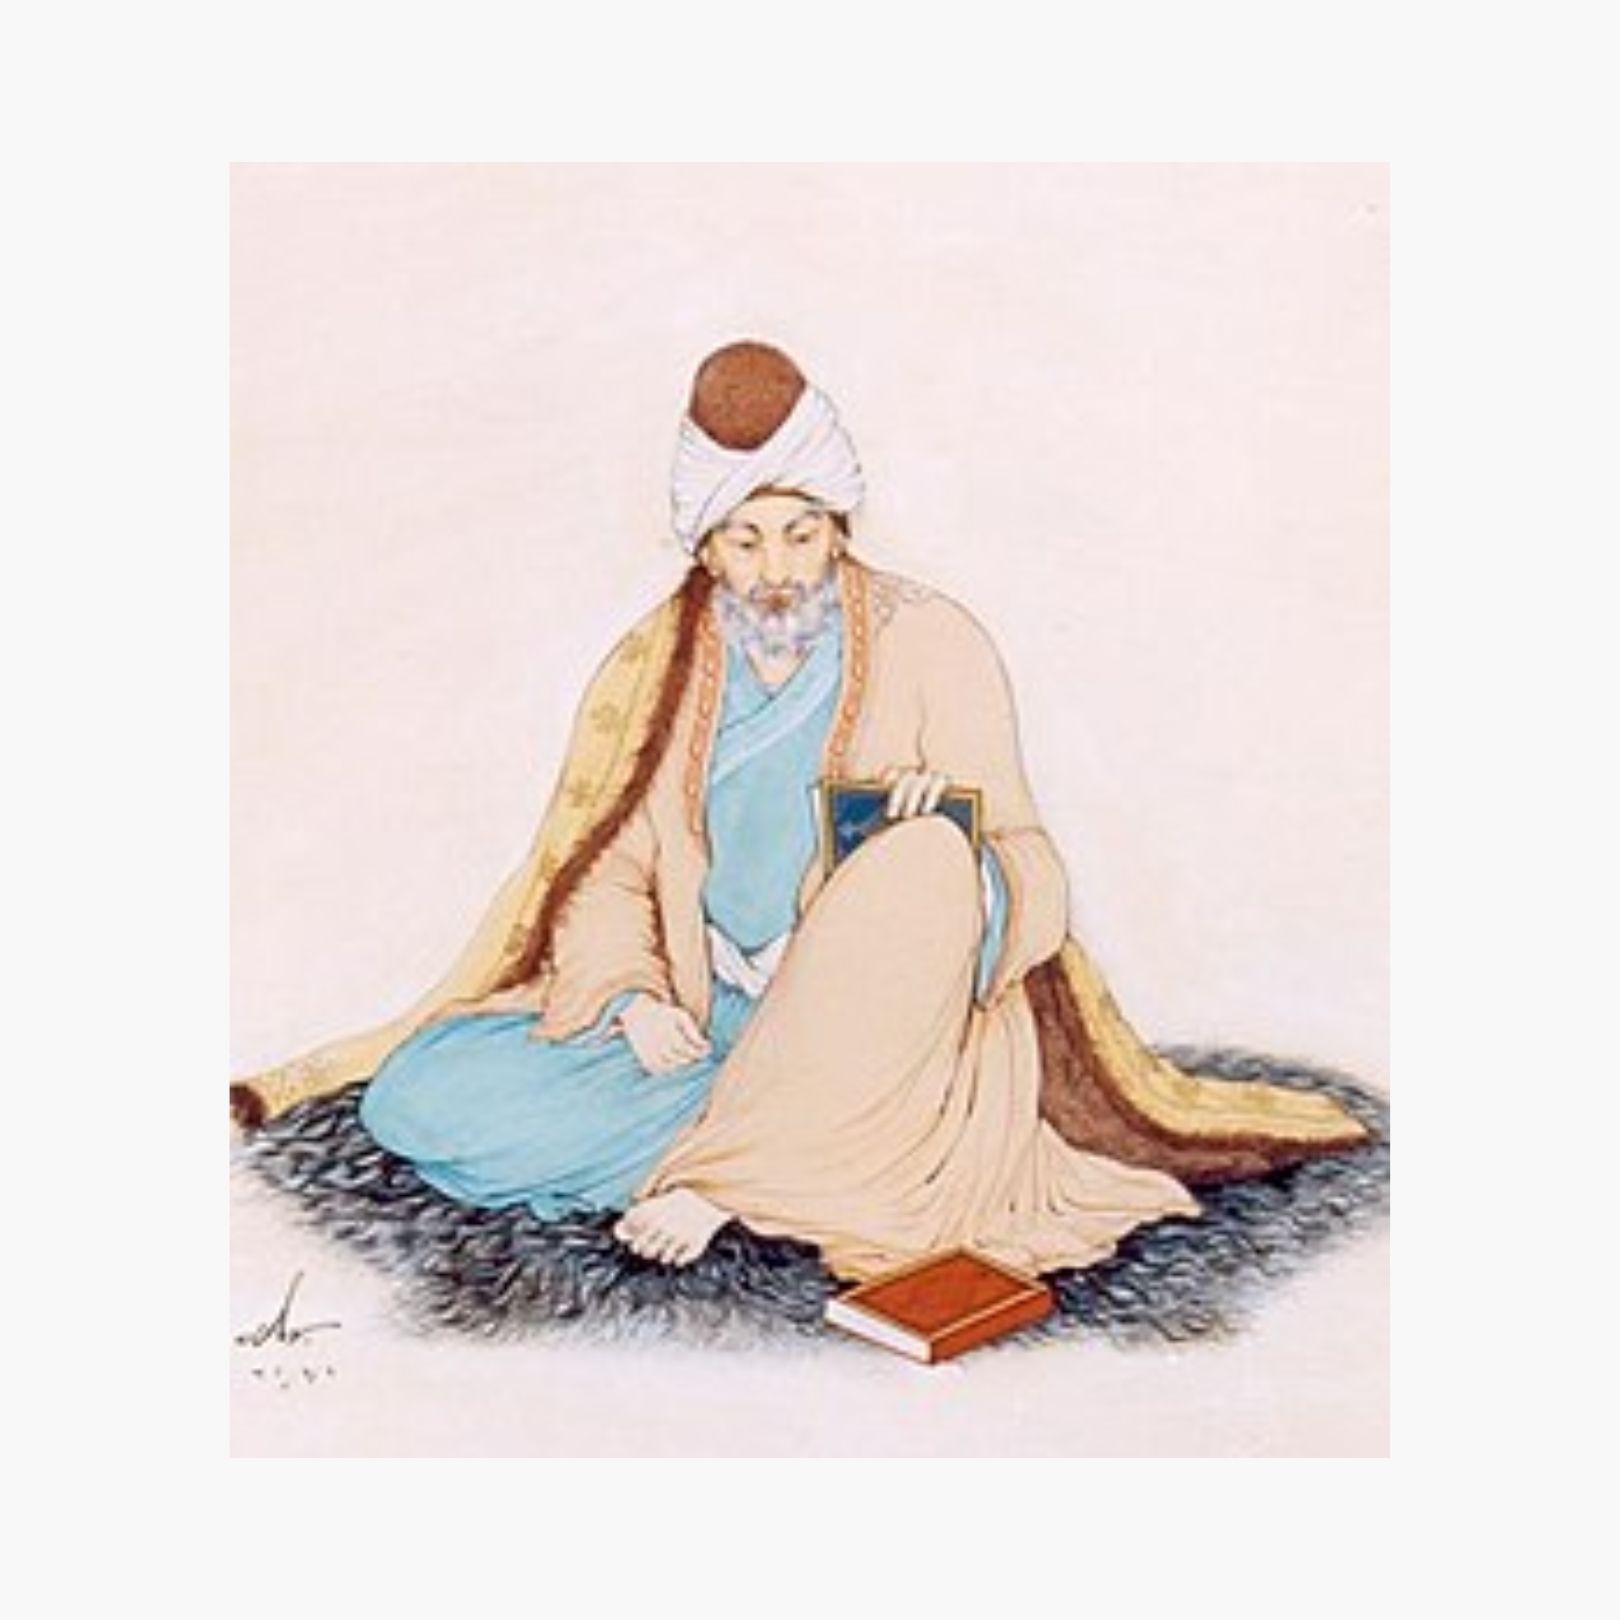 Rumi as depicted by Iranian artist Hossein Behzad (1957)